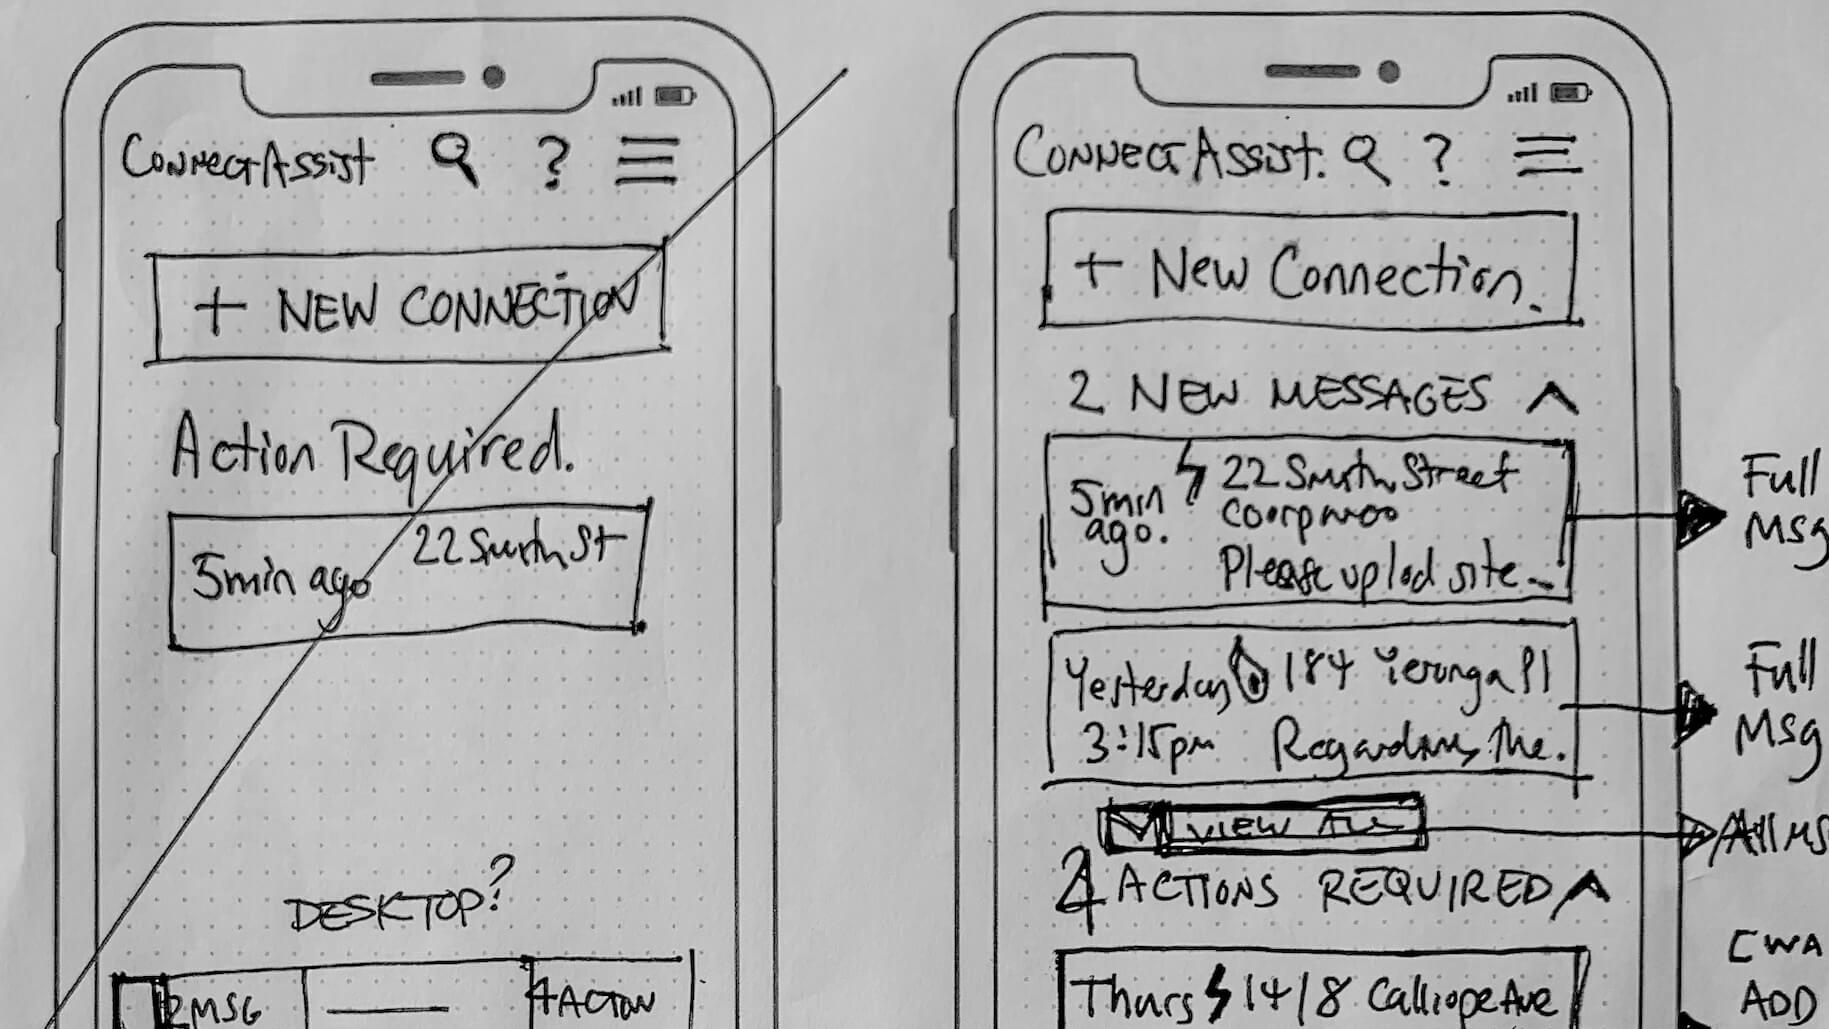 Wireframe sketches for mobile app